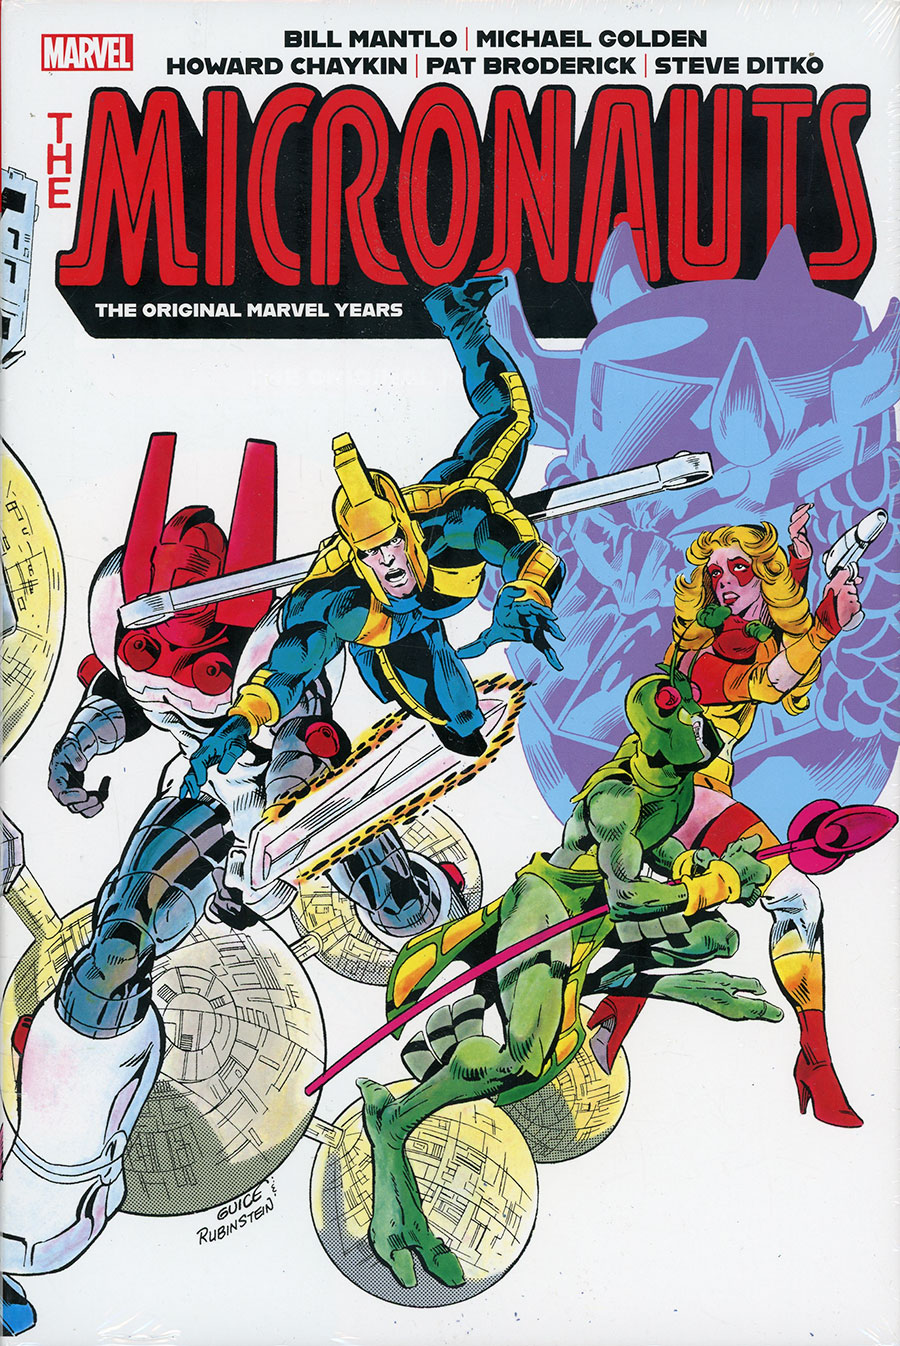 Micronauts Original Marvel Years Omnibus Vol 1 HC Direct Market Butch Guice Variant Cover